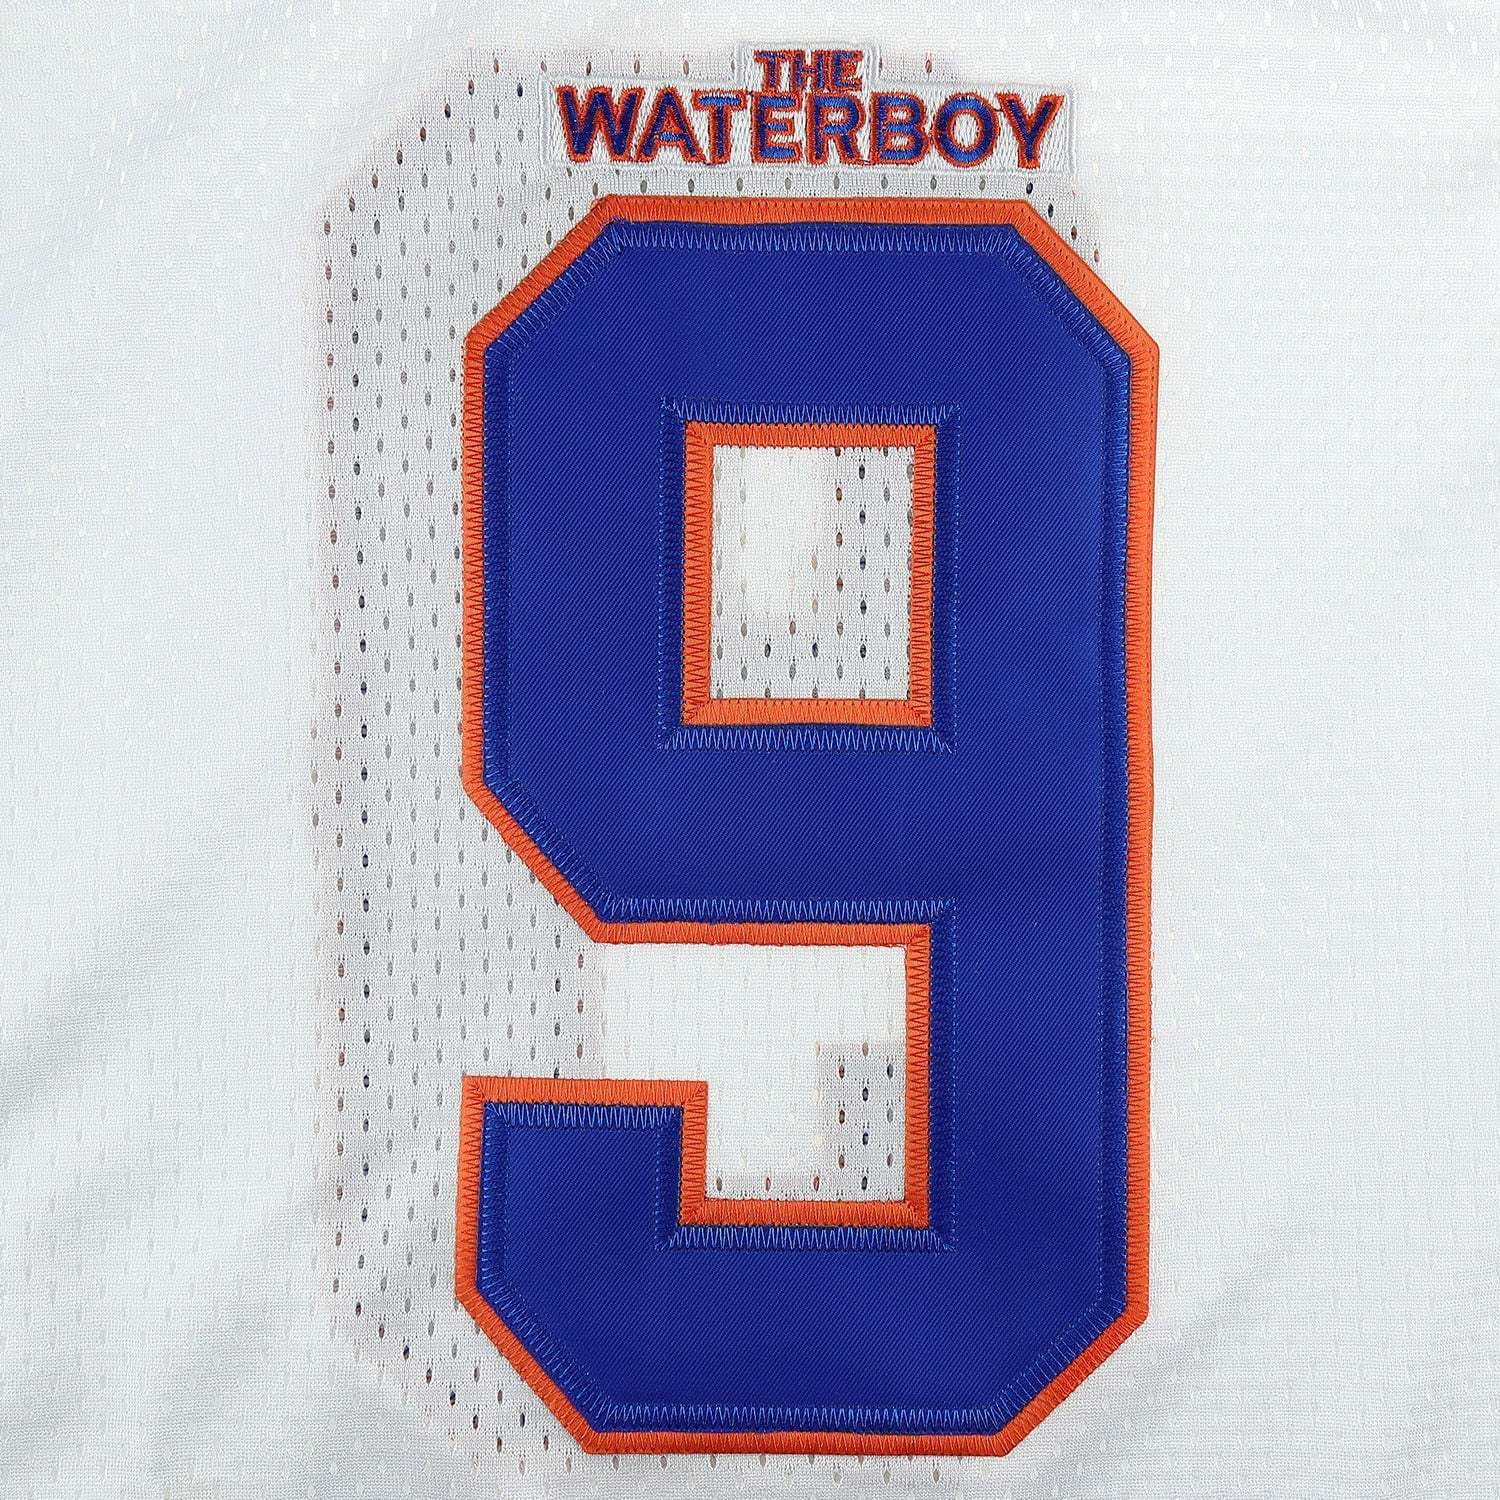  Yeee JPEglN Waterboy Football Jersey Stitched #9 Bobby Boucher 50th  Anniversary Movie Jerseys S-XXXL (White, S) : Clothing, Shoes & Jewelry